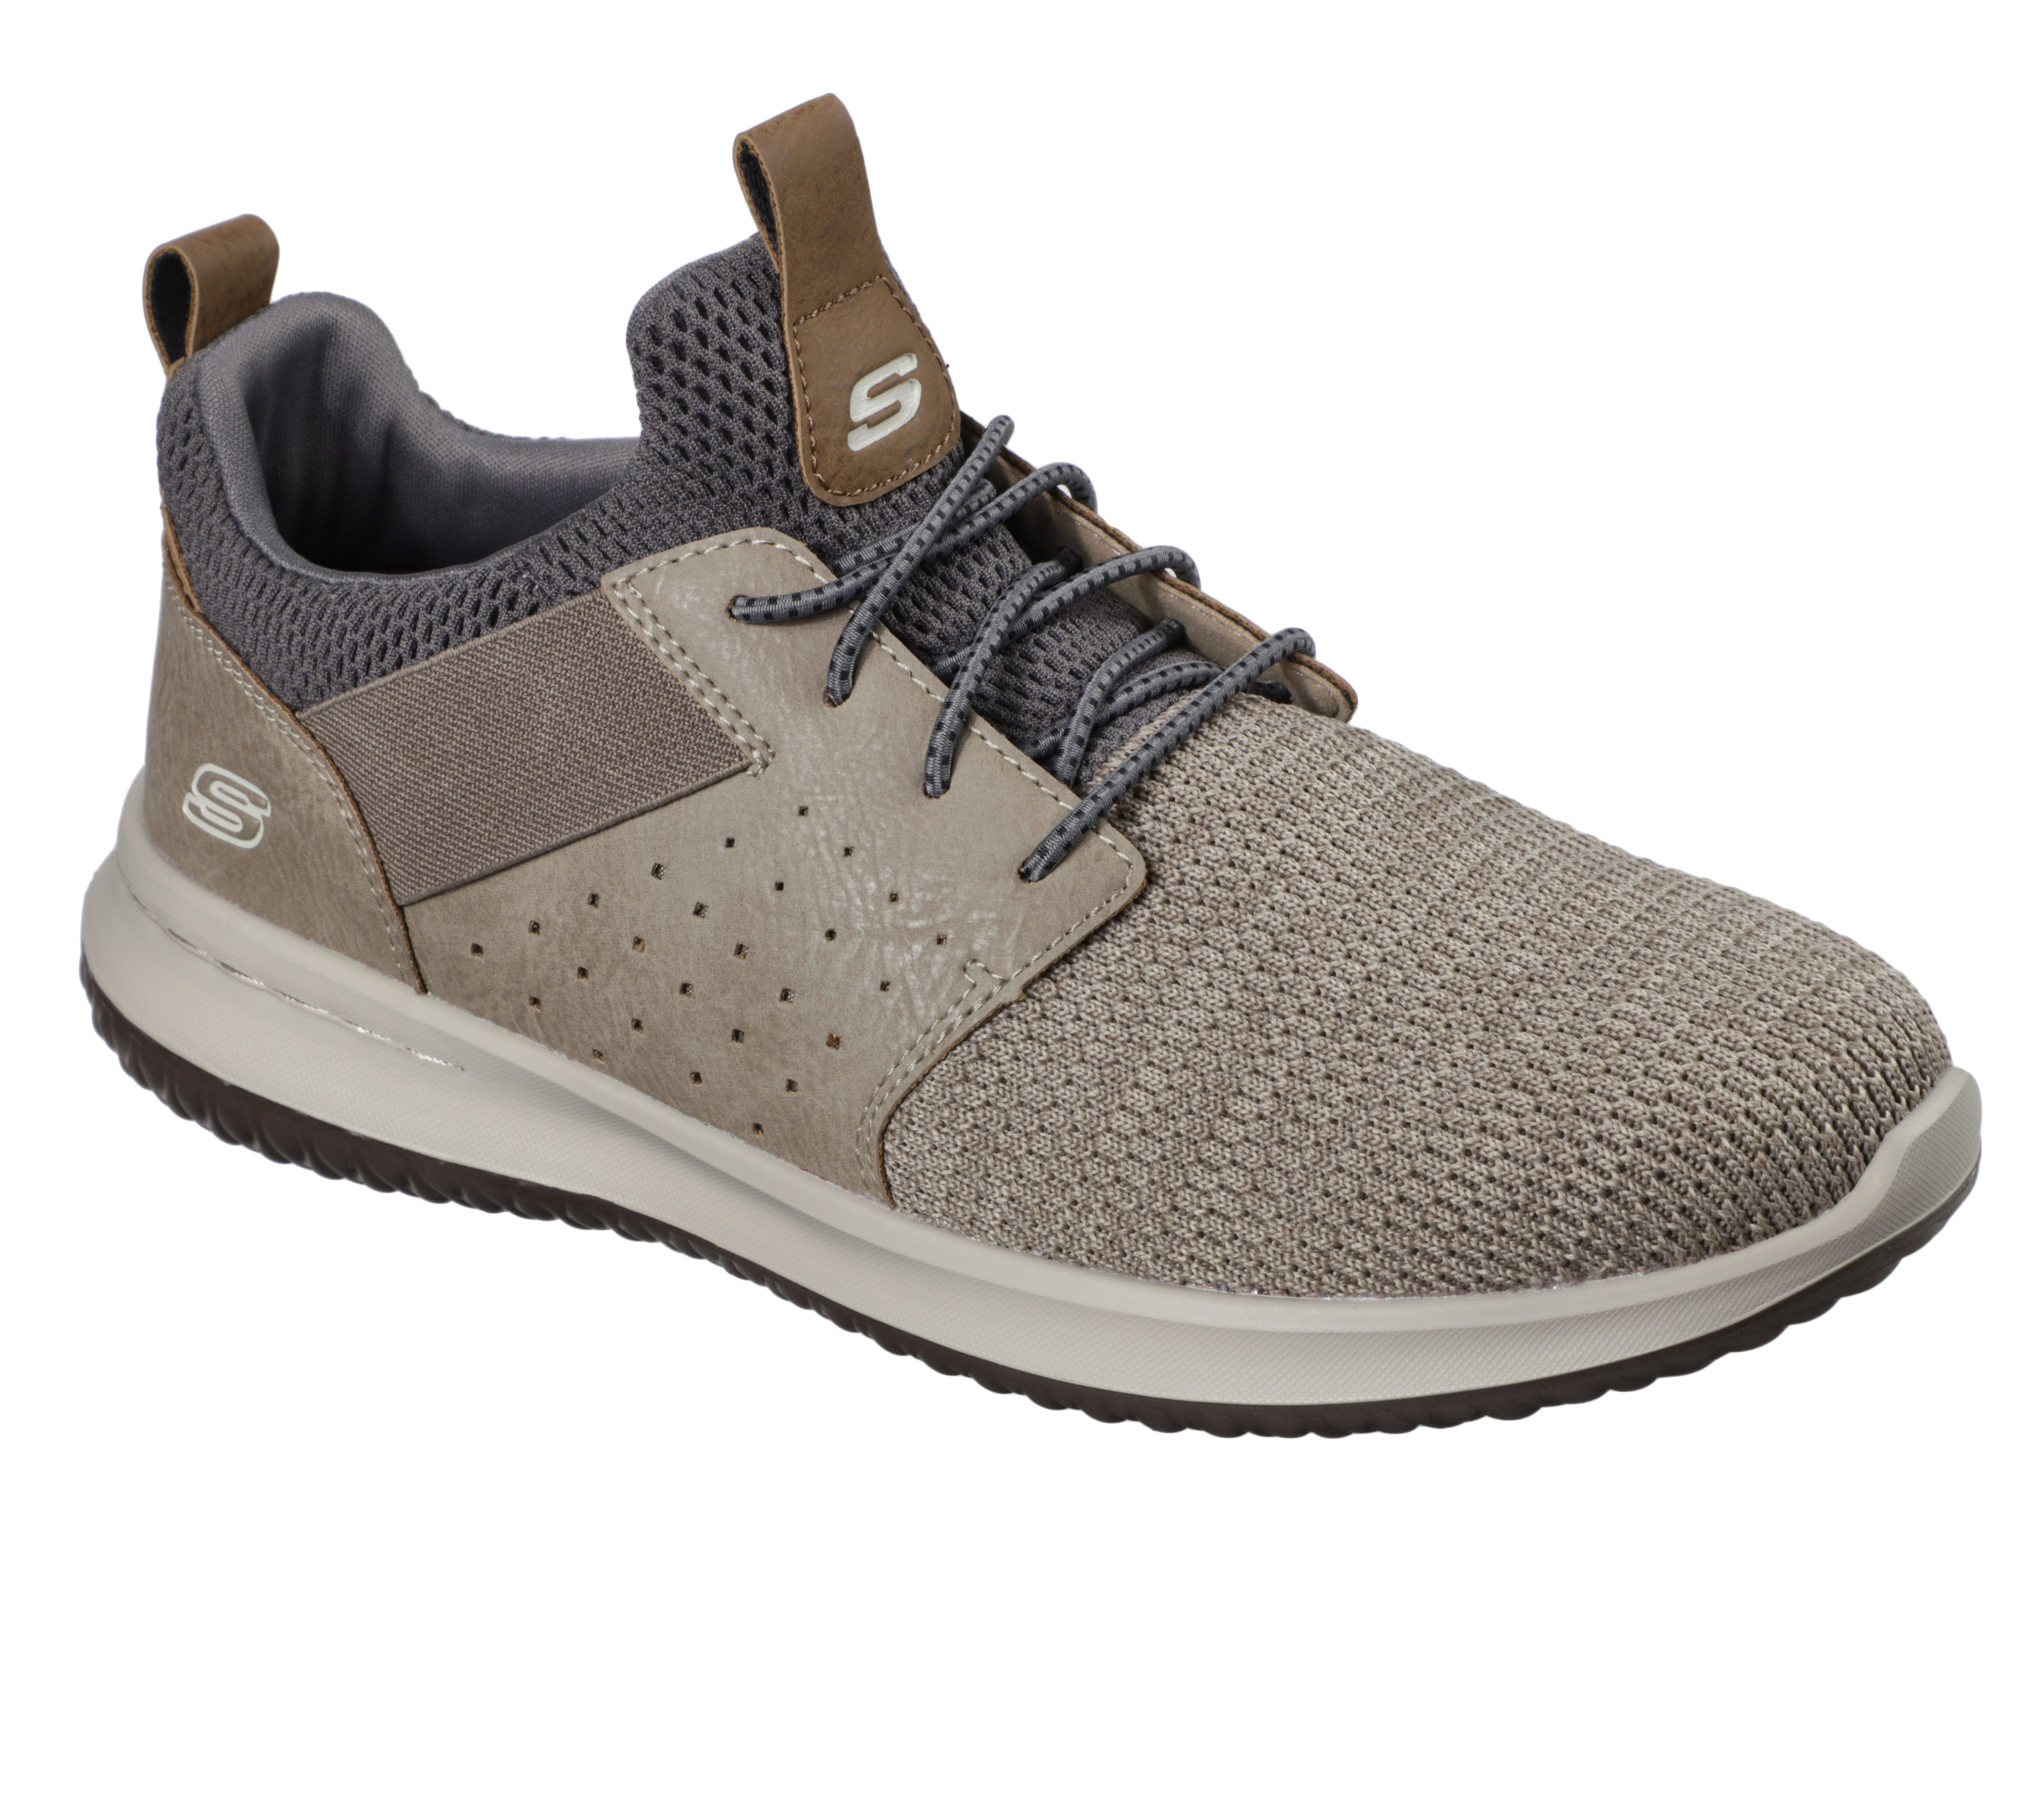 Shop the Delson - Camben | SKECHERS